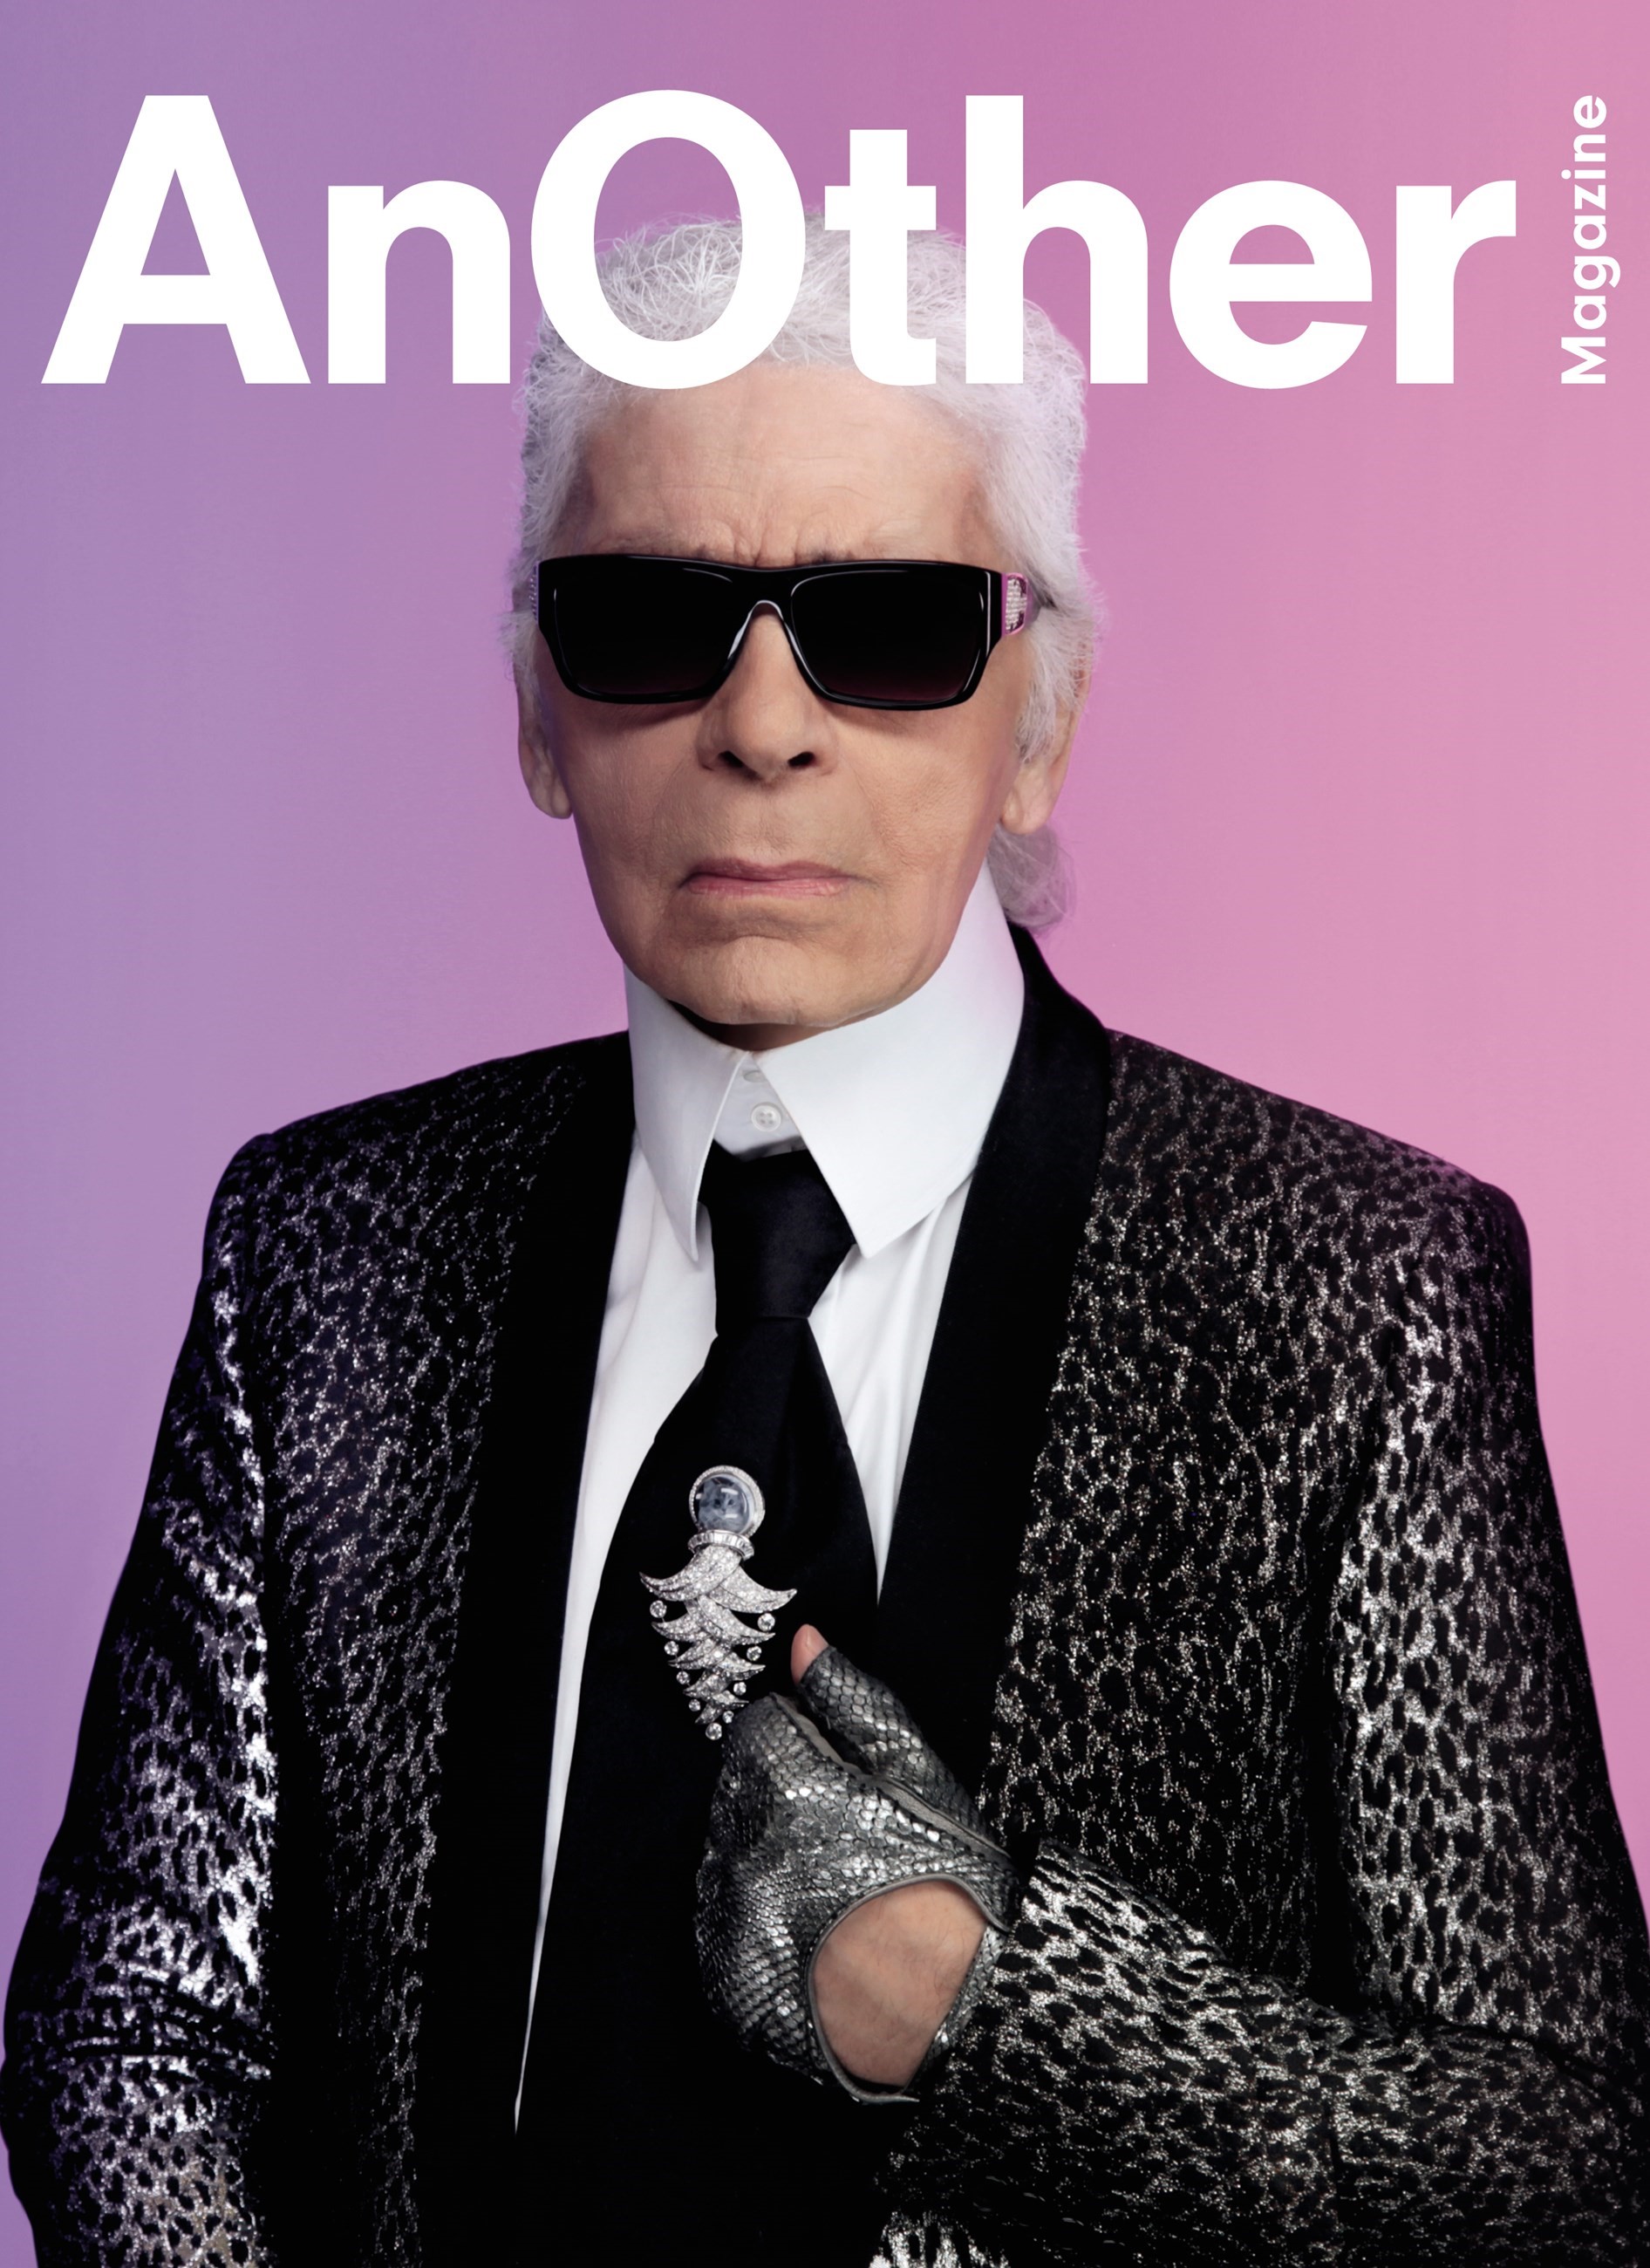 Karl Lagerfeld memorial to be held at the Grand Palais during